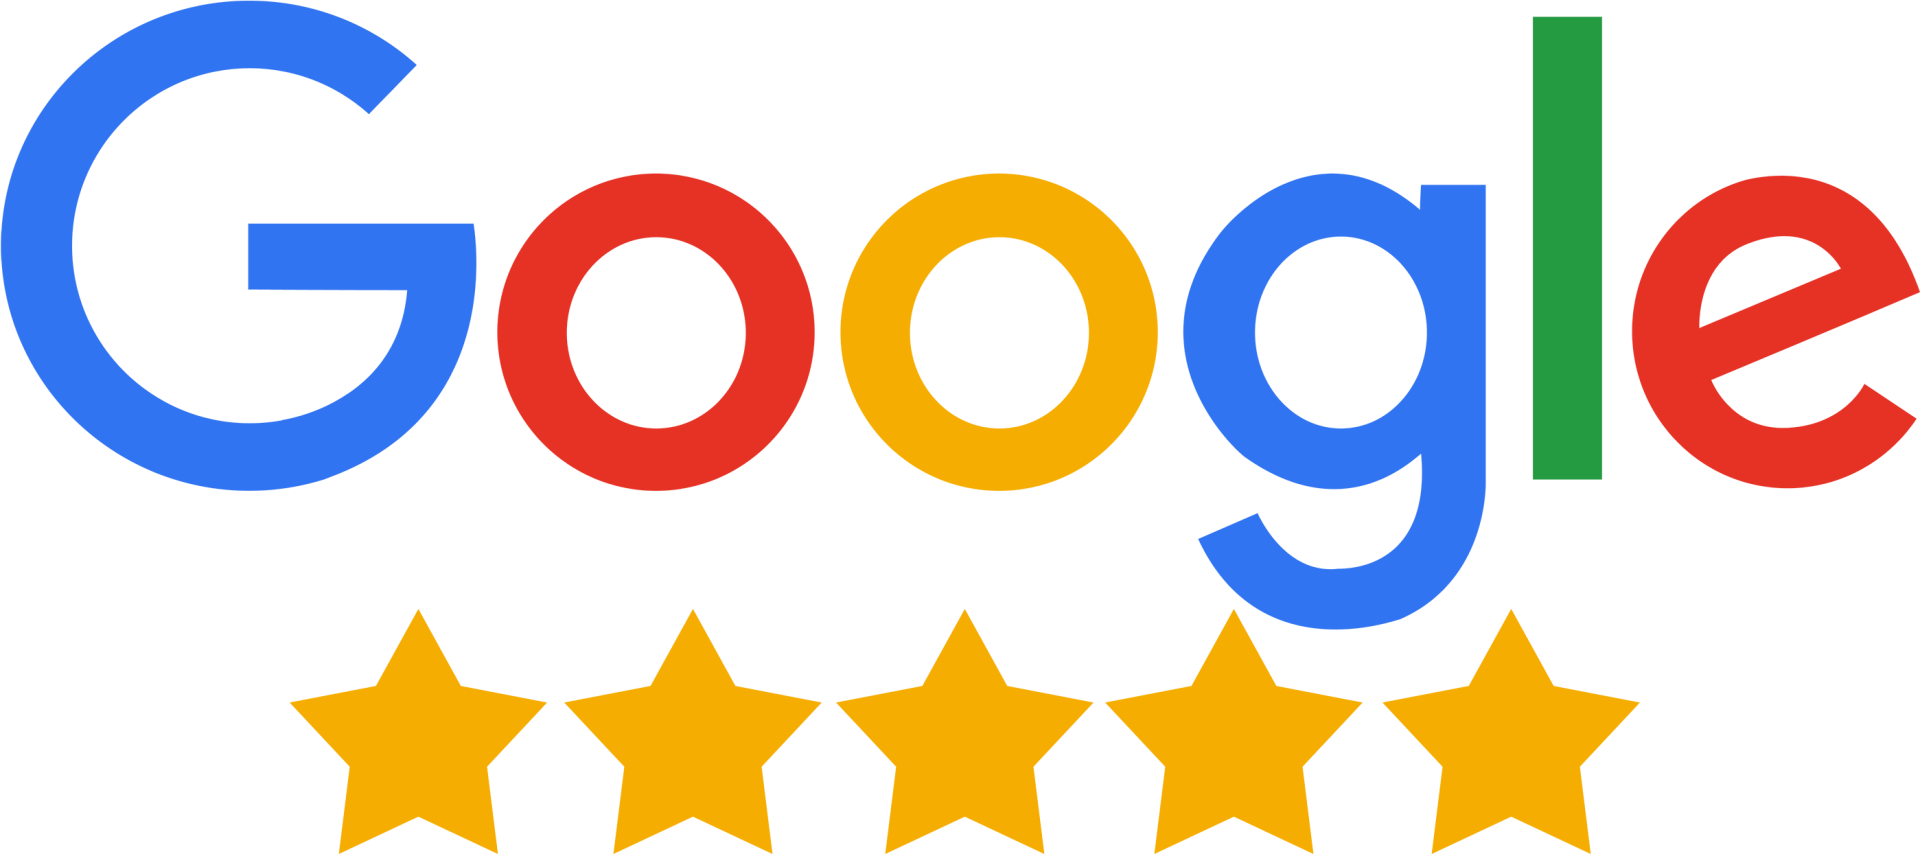 Please Review U s on Google